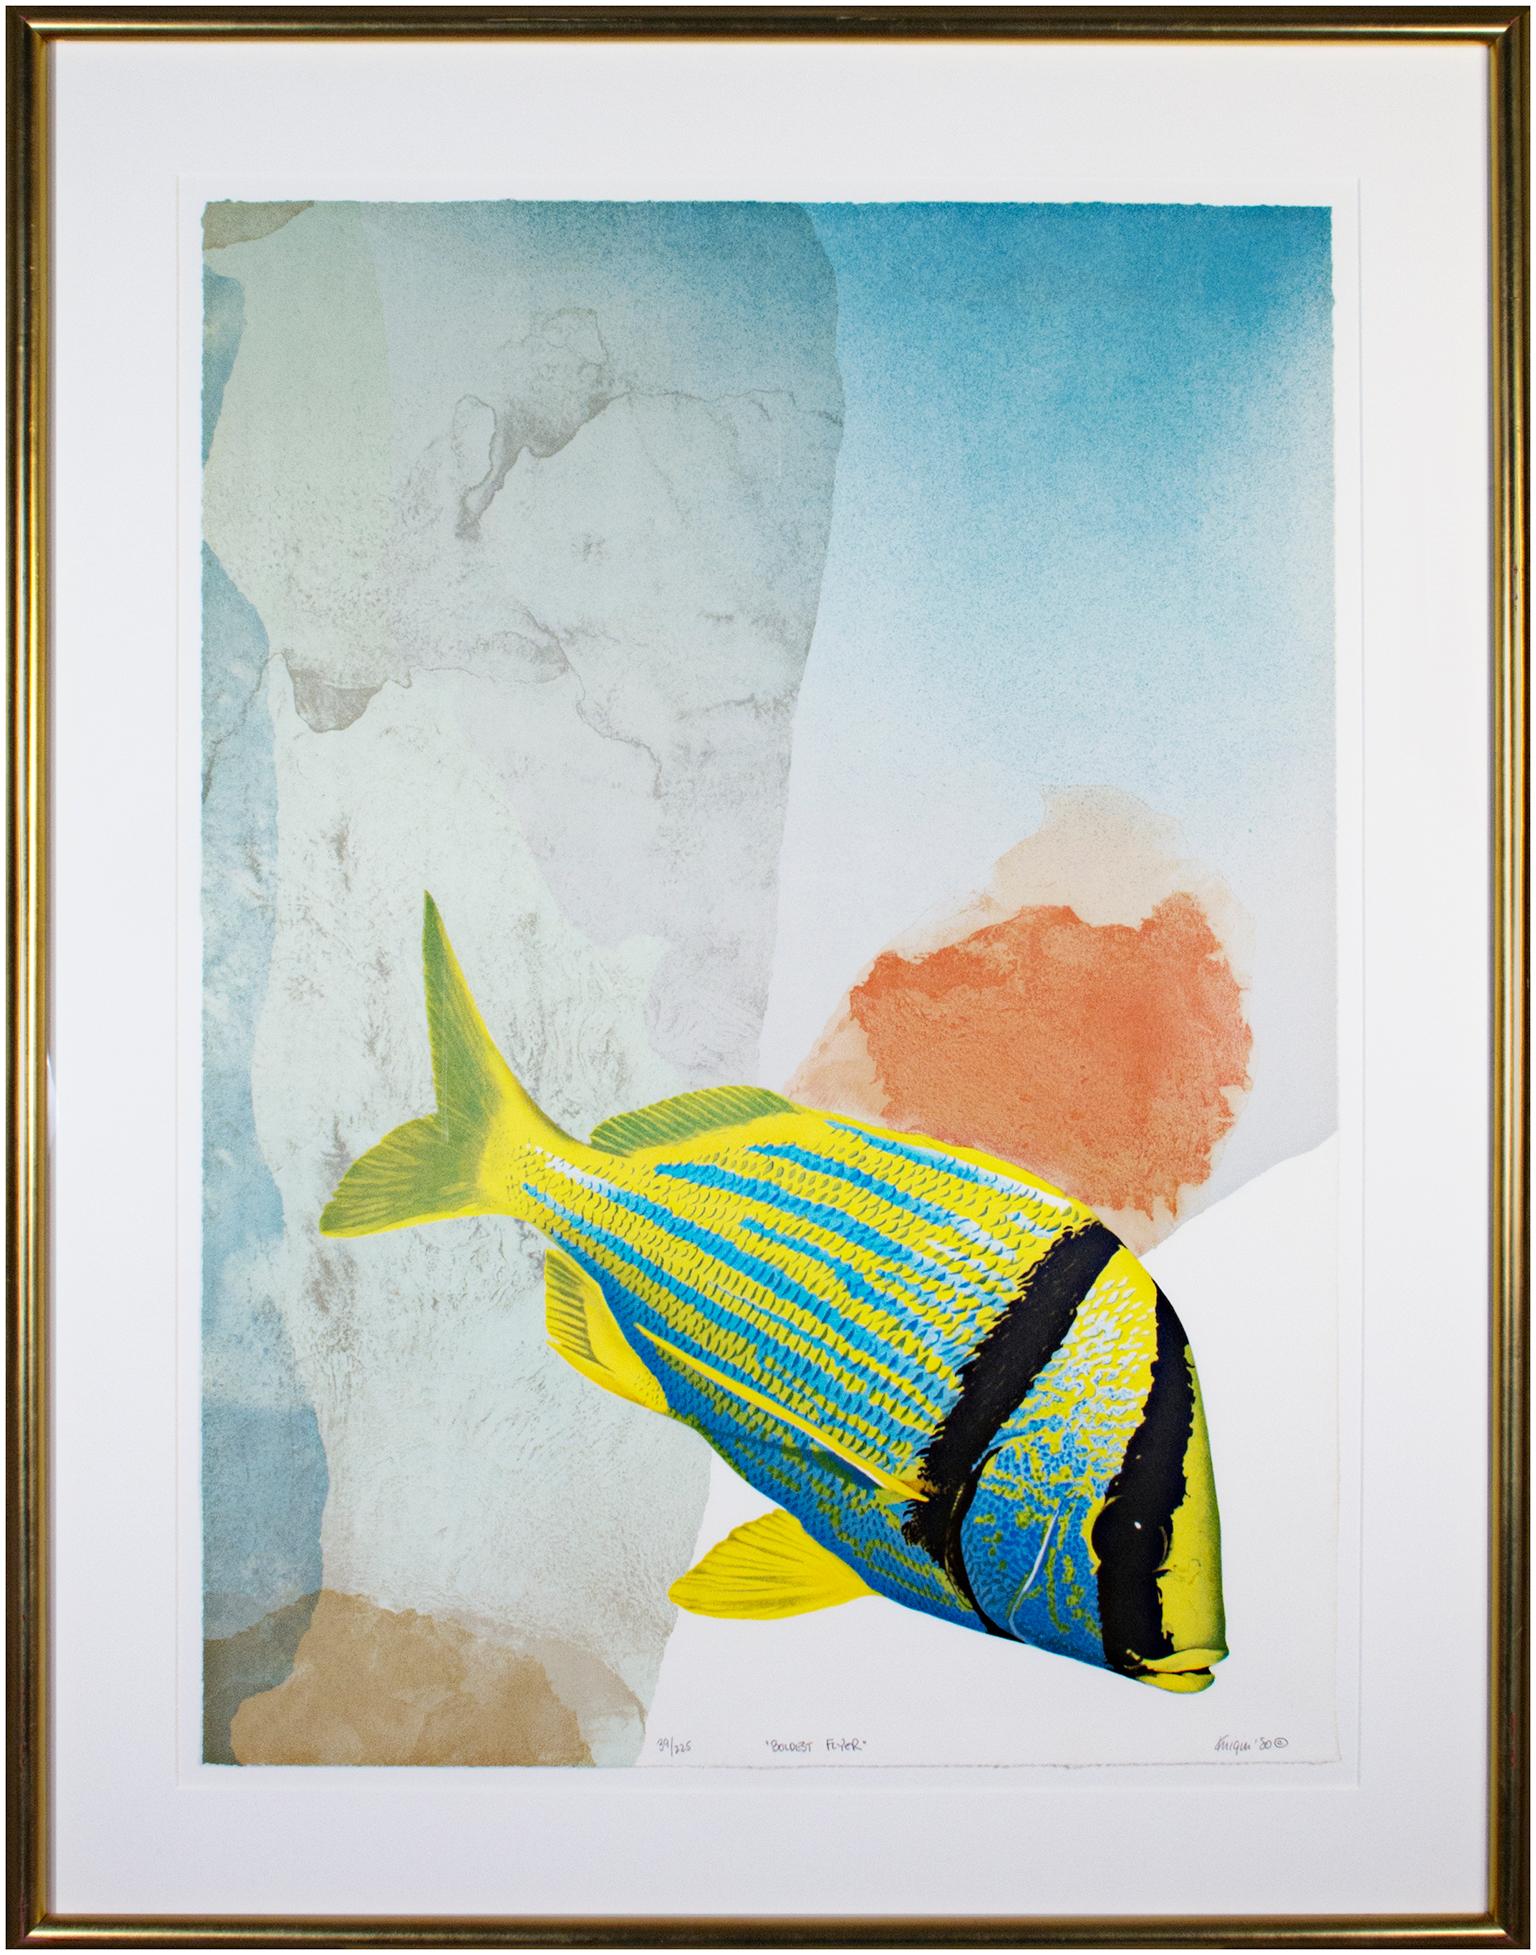 Michael Knigin Animal Print - "Boldest Flyer, " original signed lithograph abstract realist fish calm mellow